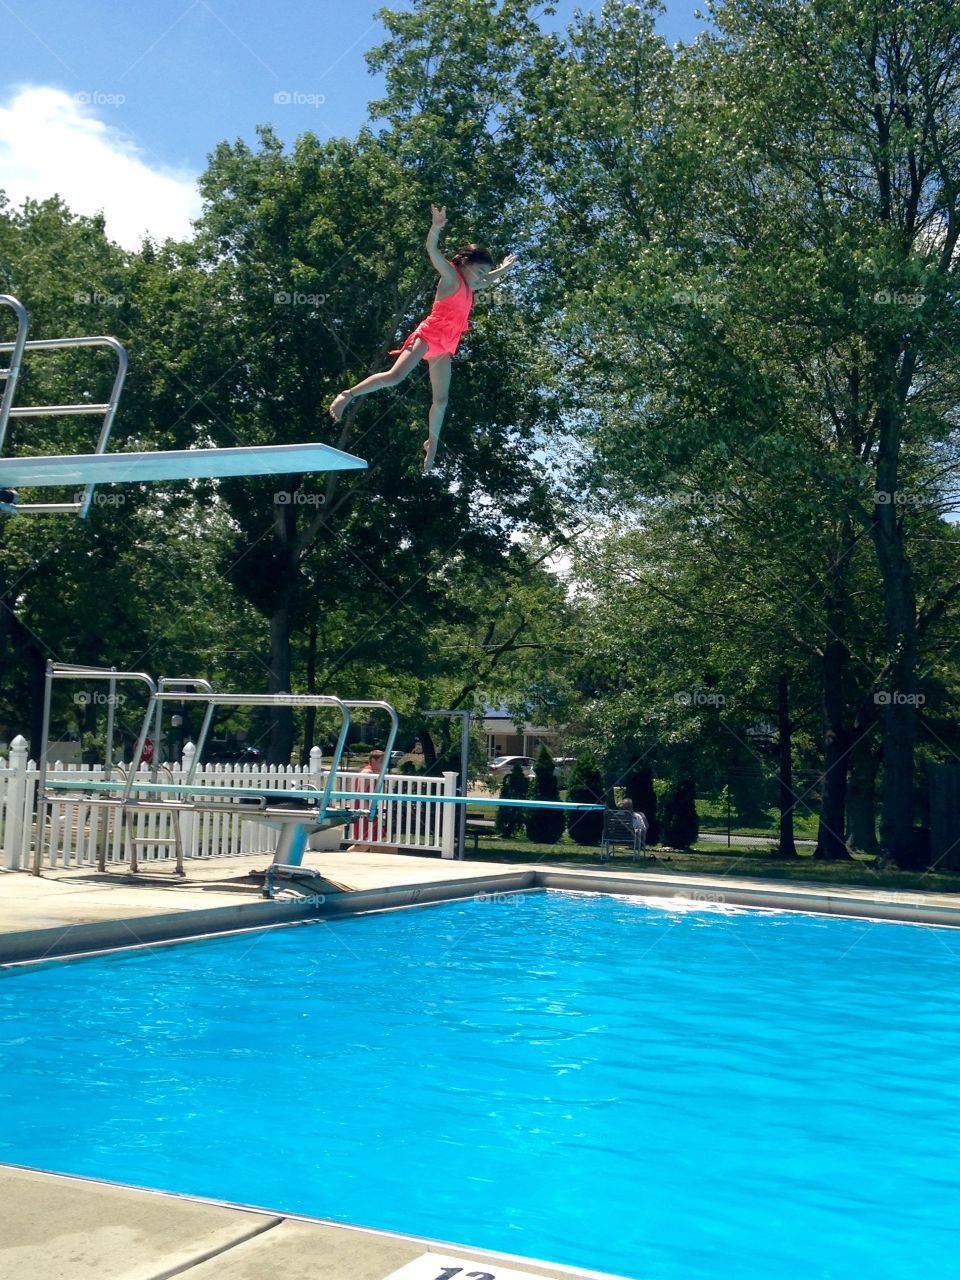 Jumping off the high dive!